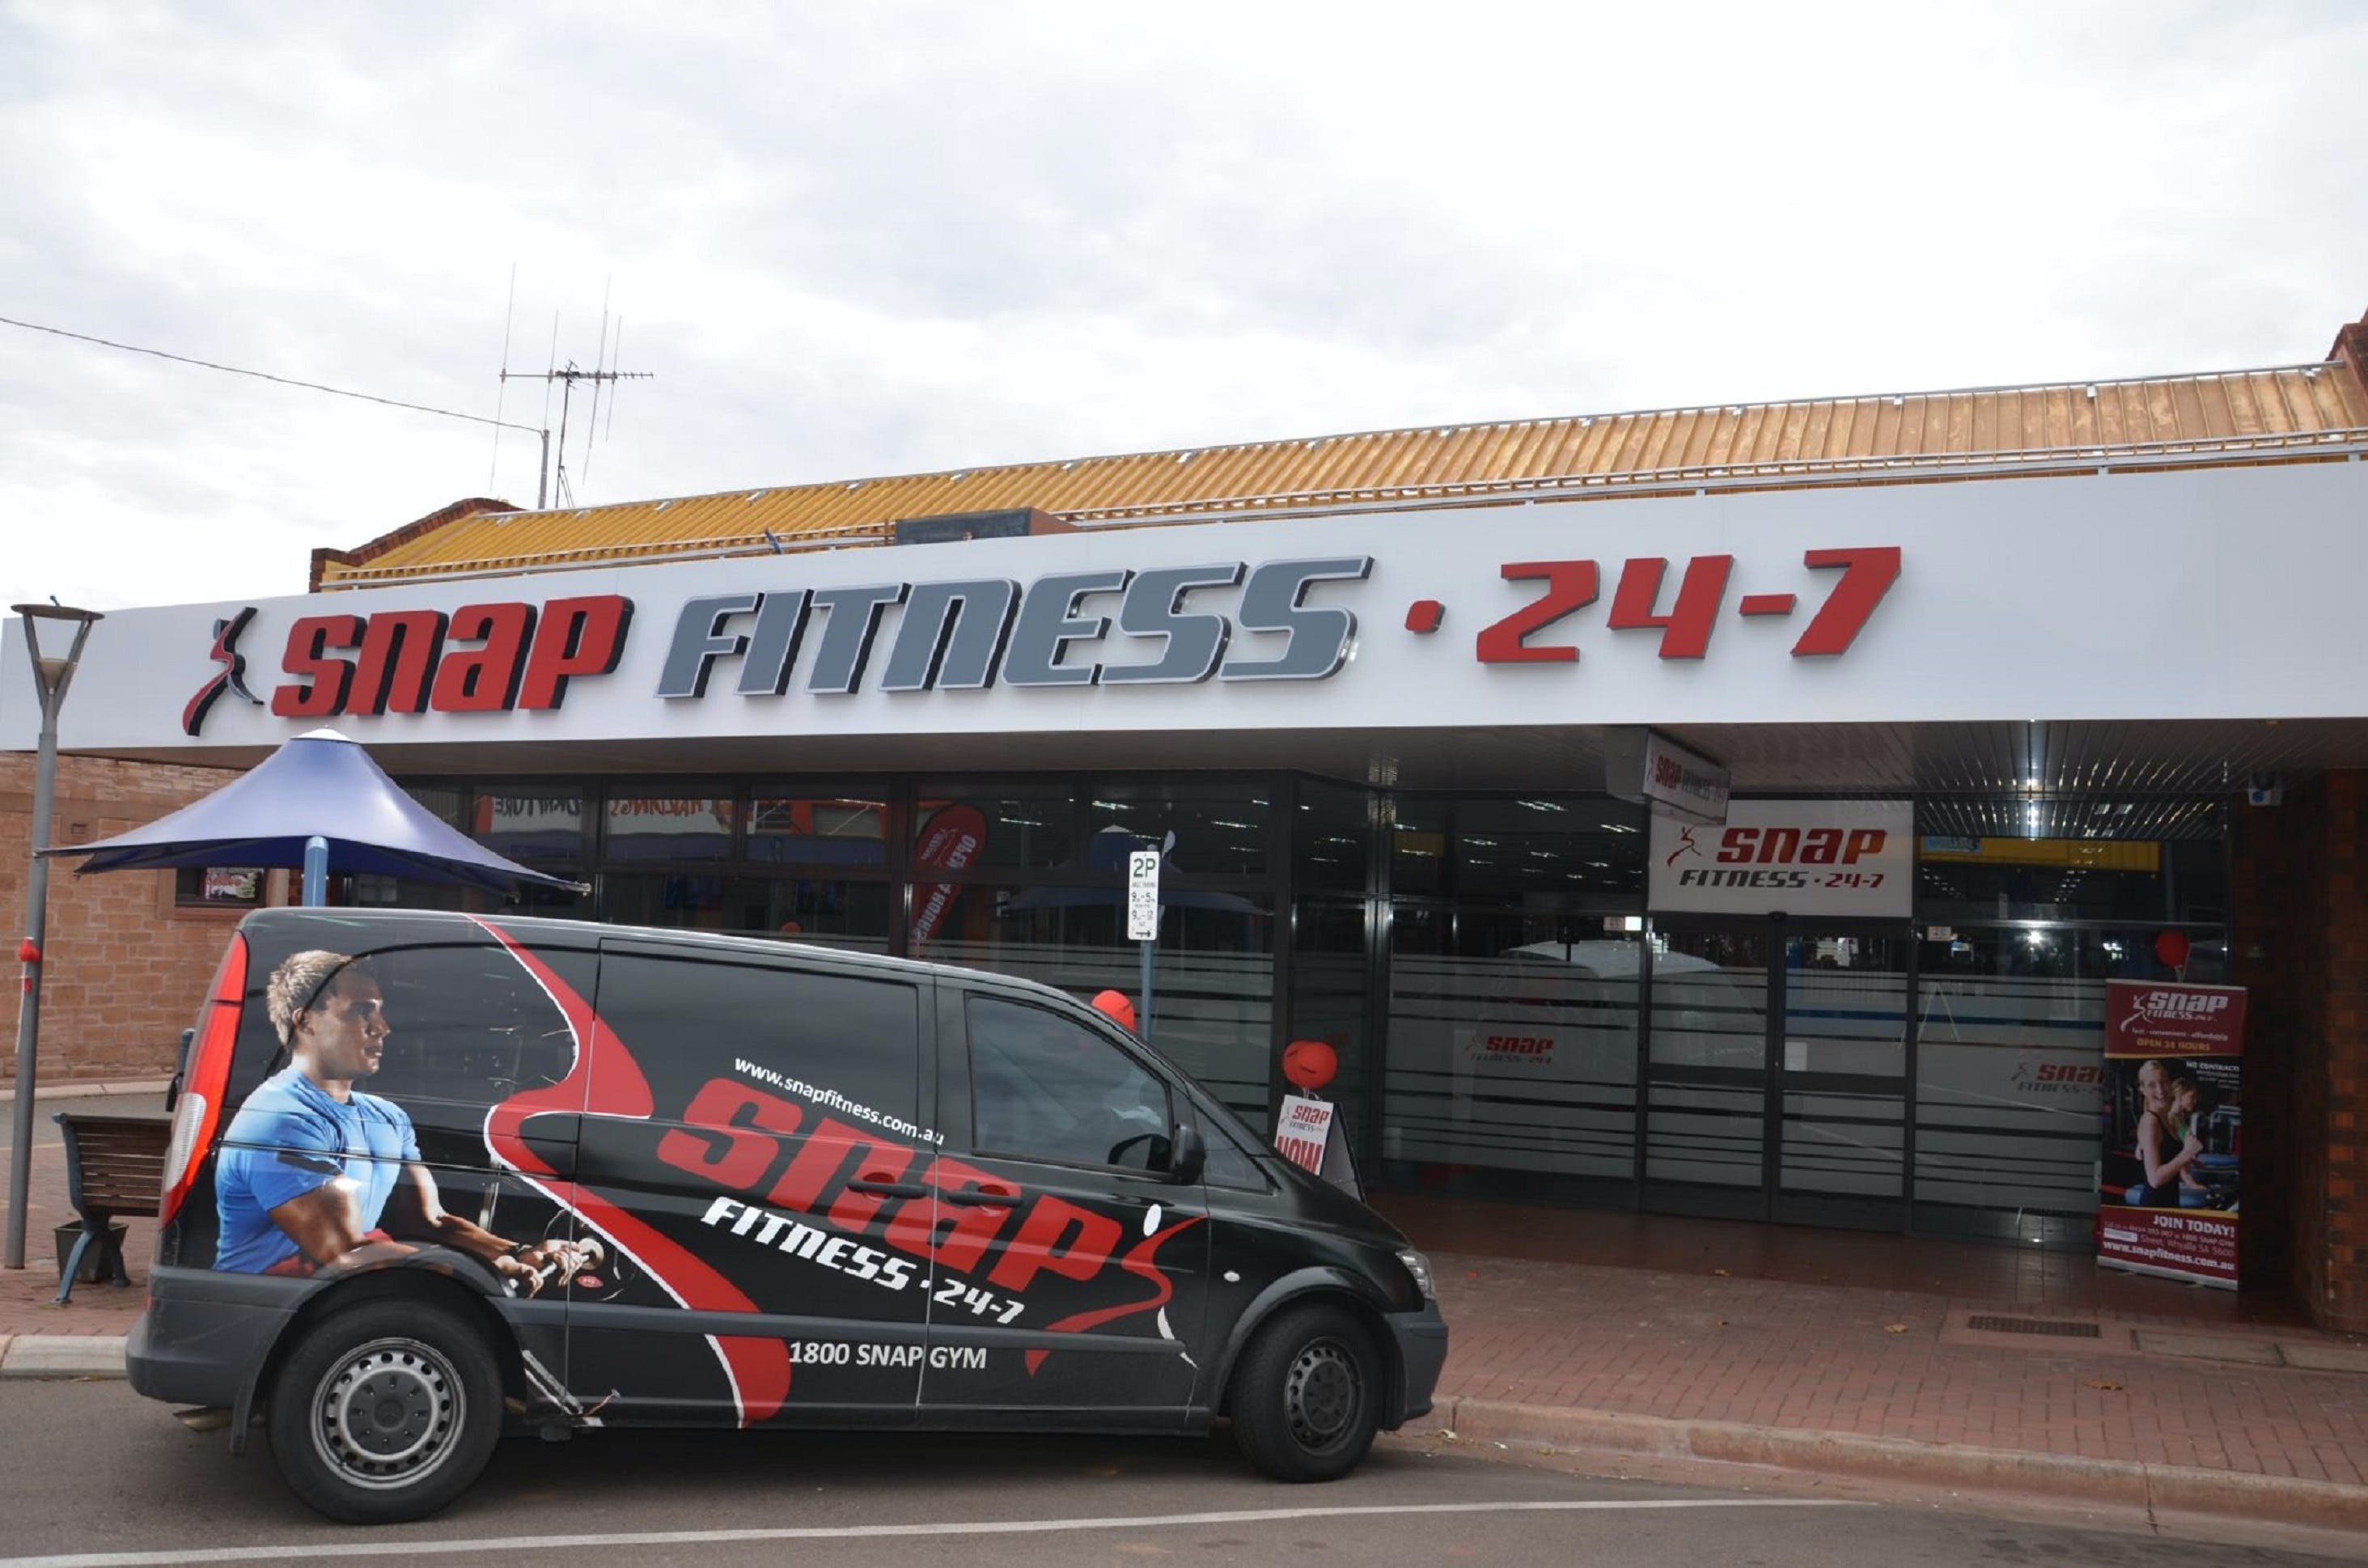 Snap Fitness Whyalla 24/7 gym - Accommodation Georgetown